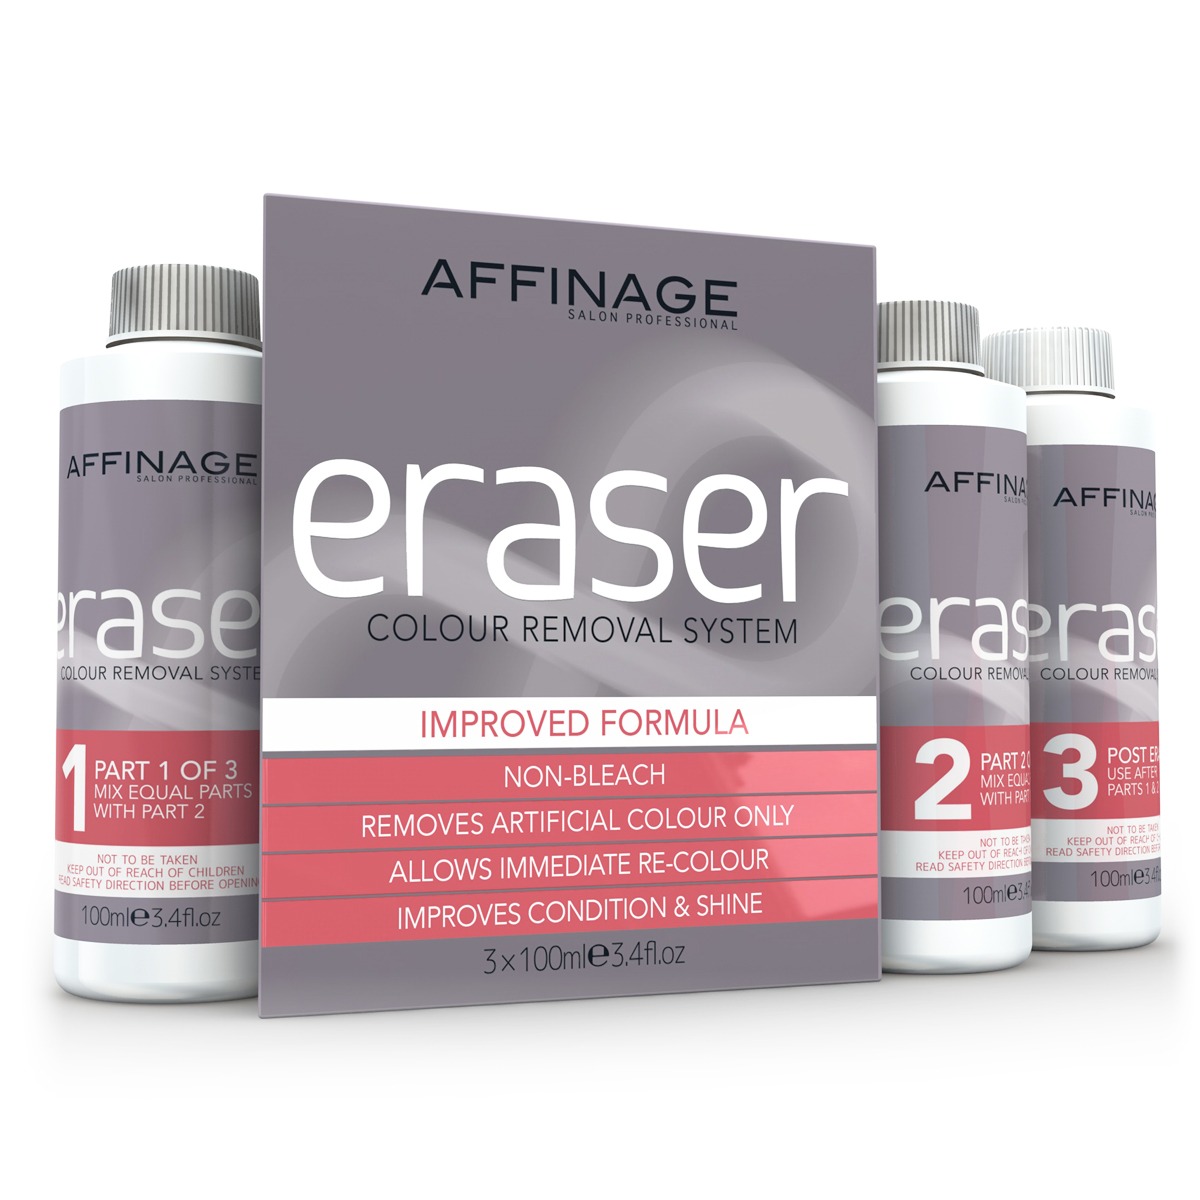 Affinage Eraser | Colour Removal | Gainfort Hair & Beauty Supplies